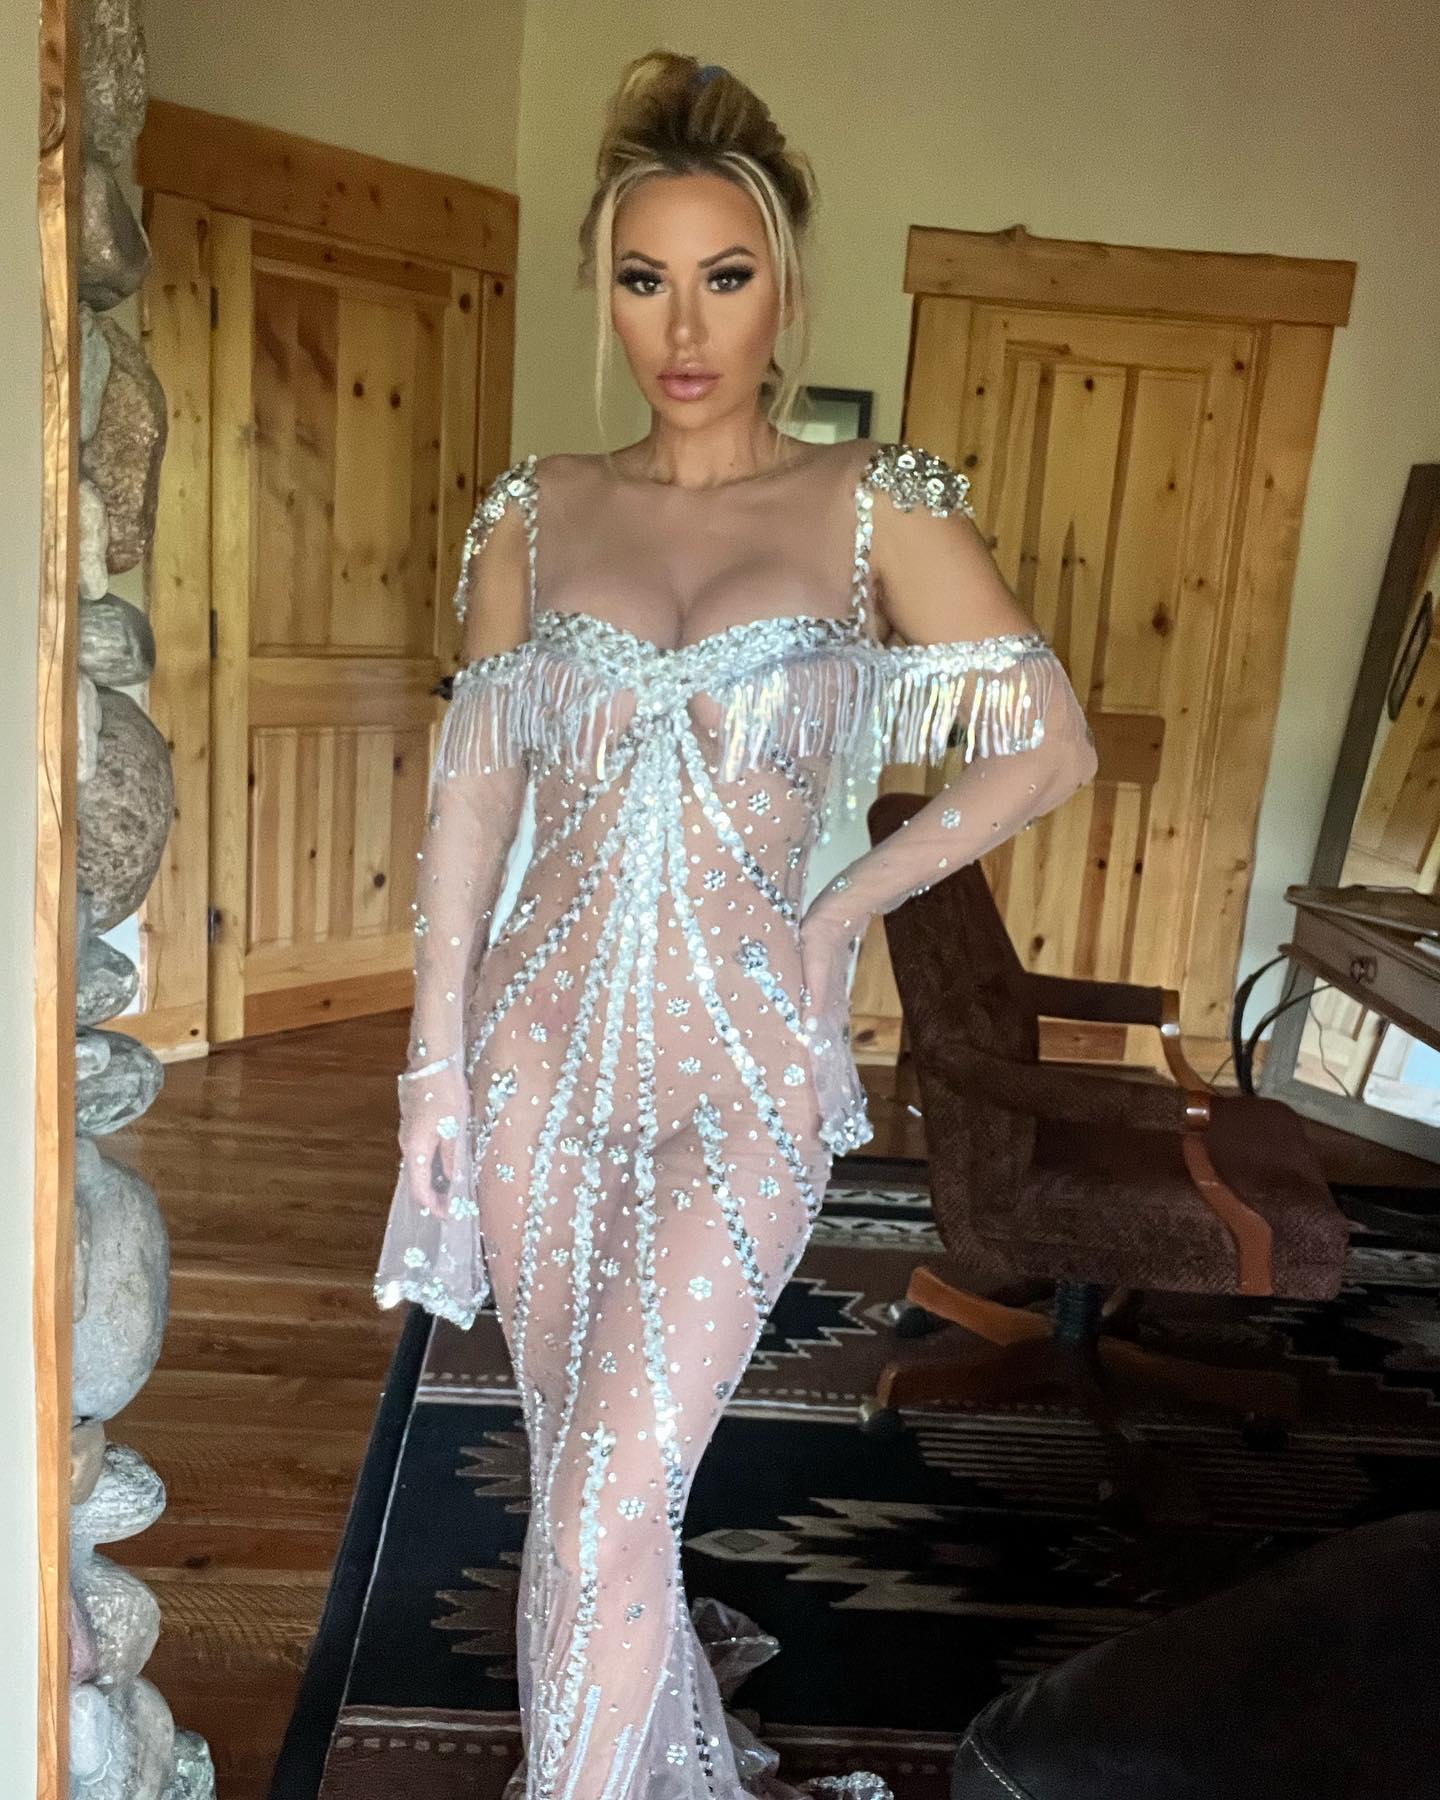 Kindly Myers poses in a see-through gown